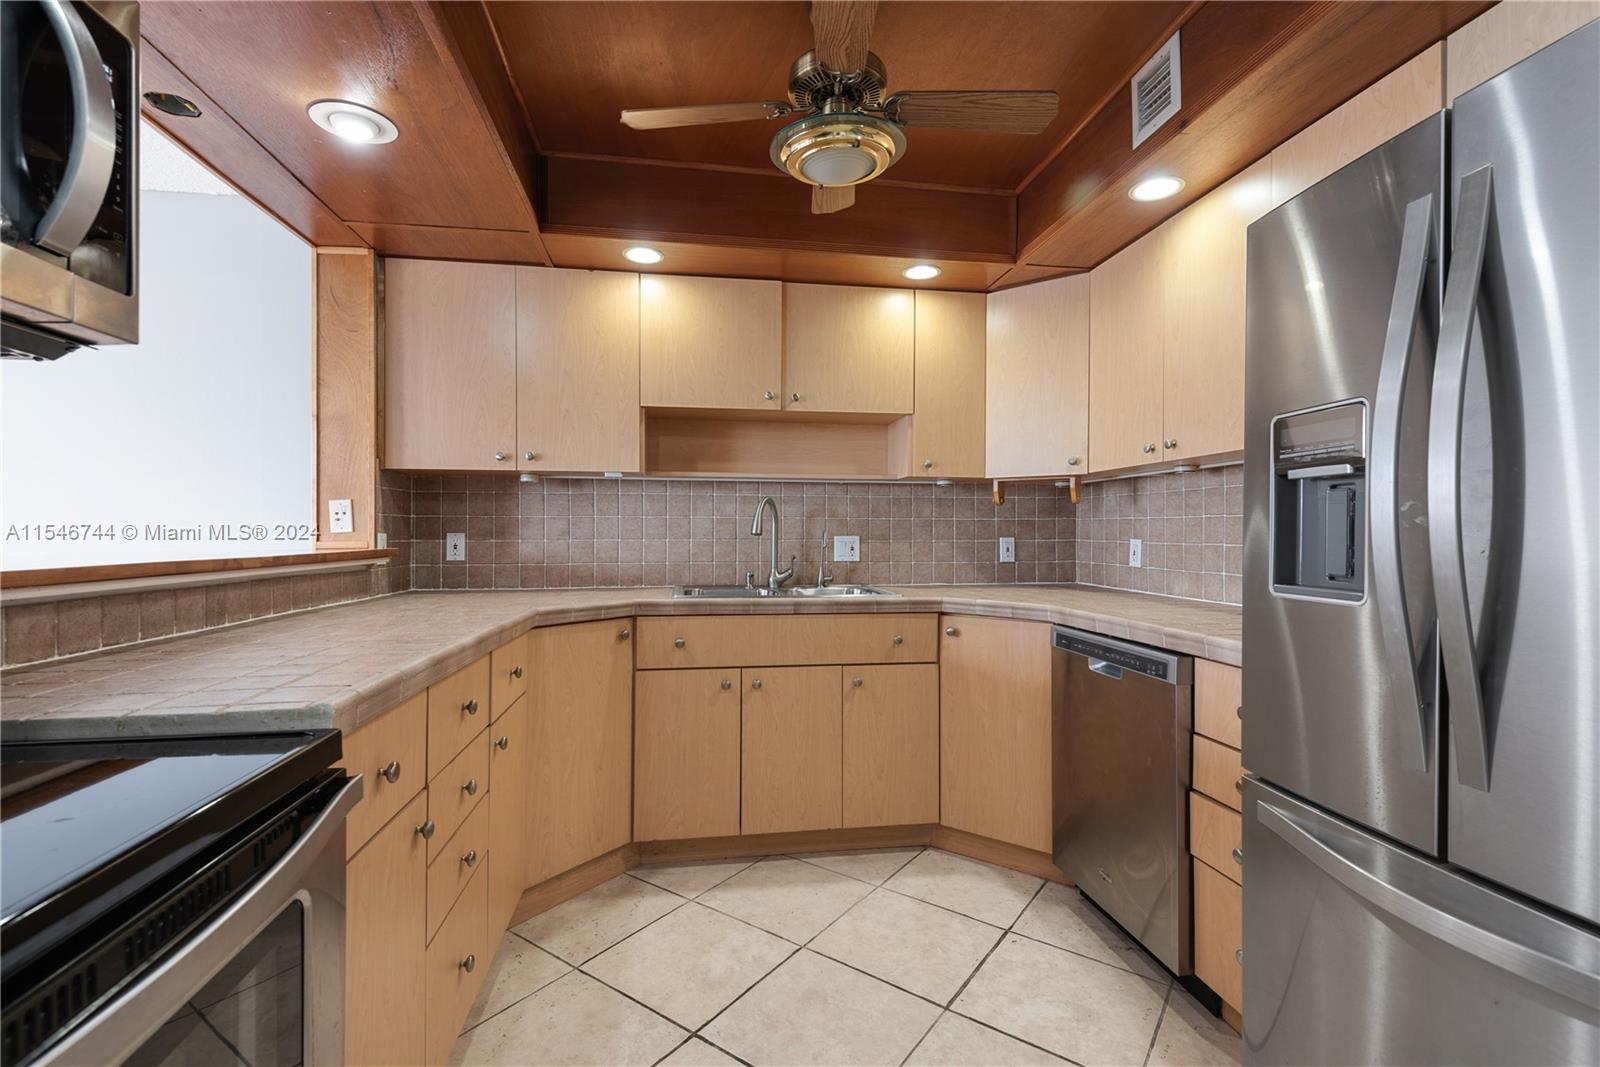 a kitchen with stainless steel appliances granite countertop a sink stove and refrigerator